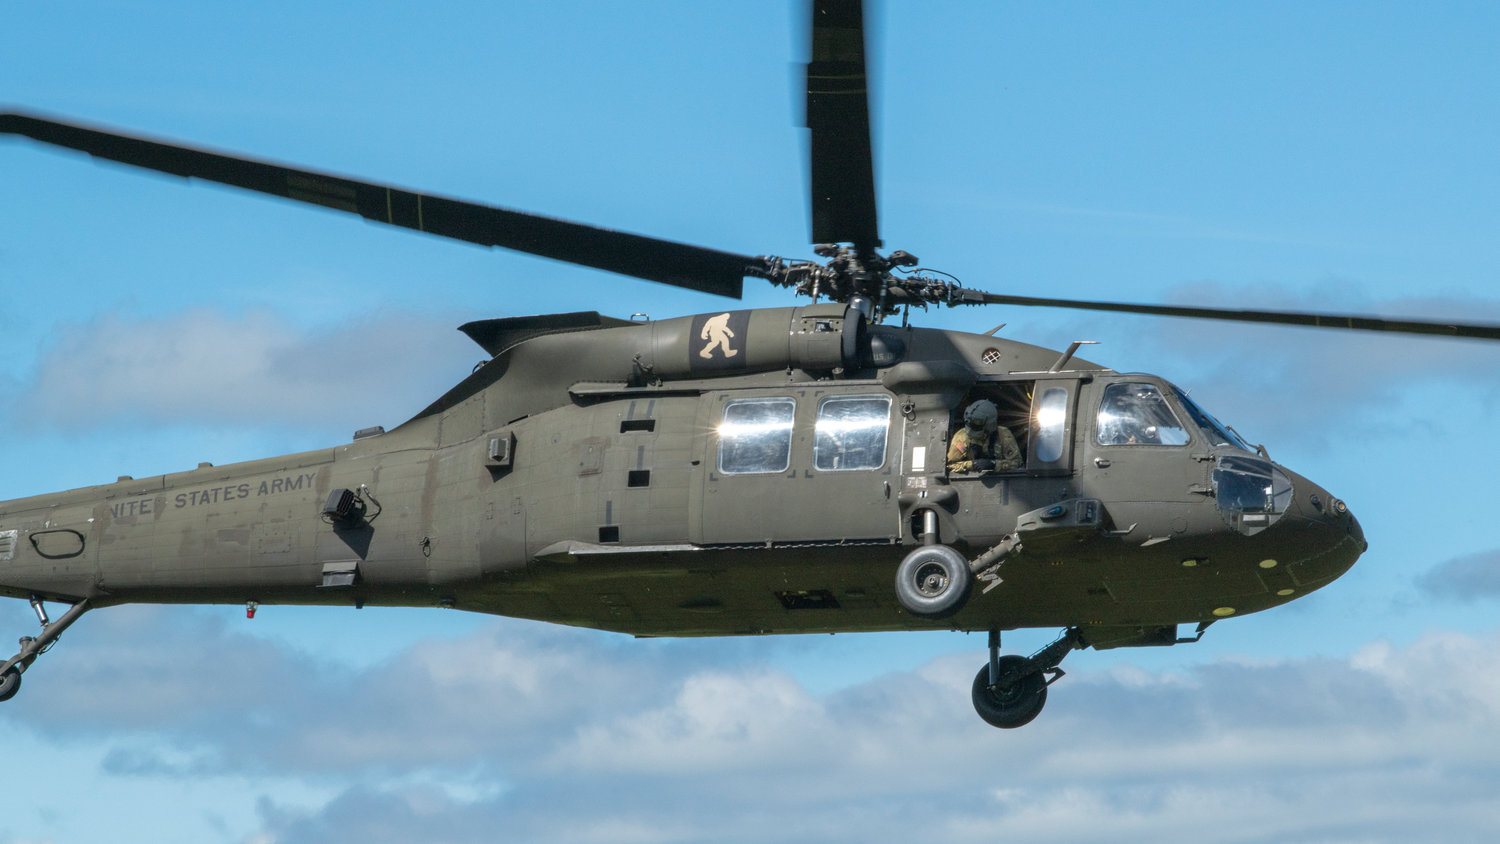 Soldiers from Joint Base Lewis-McChord participated in a training exercise at the Chehalis-Centralia Airport on on Wednesday, June 22.